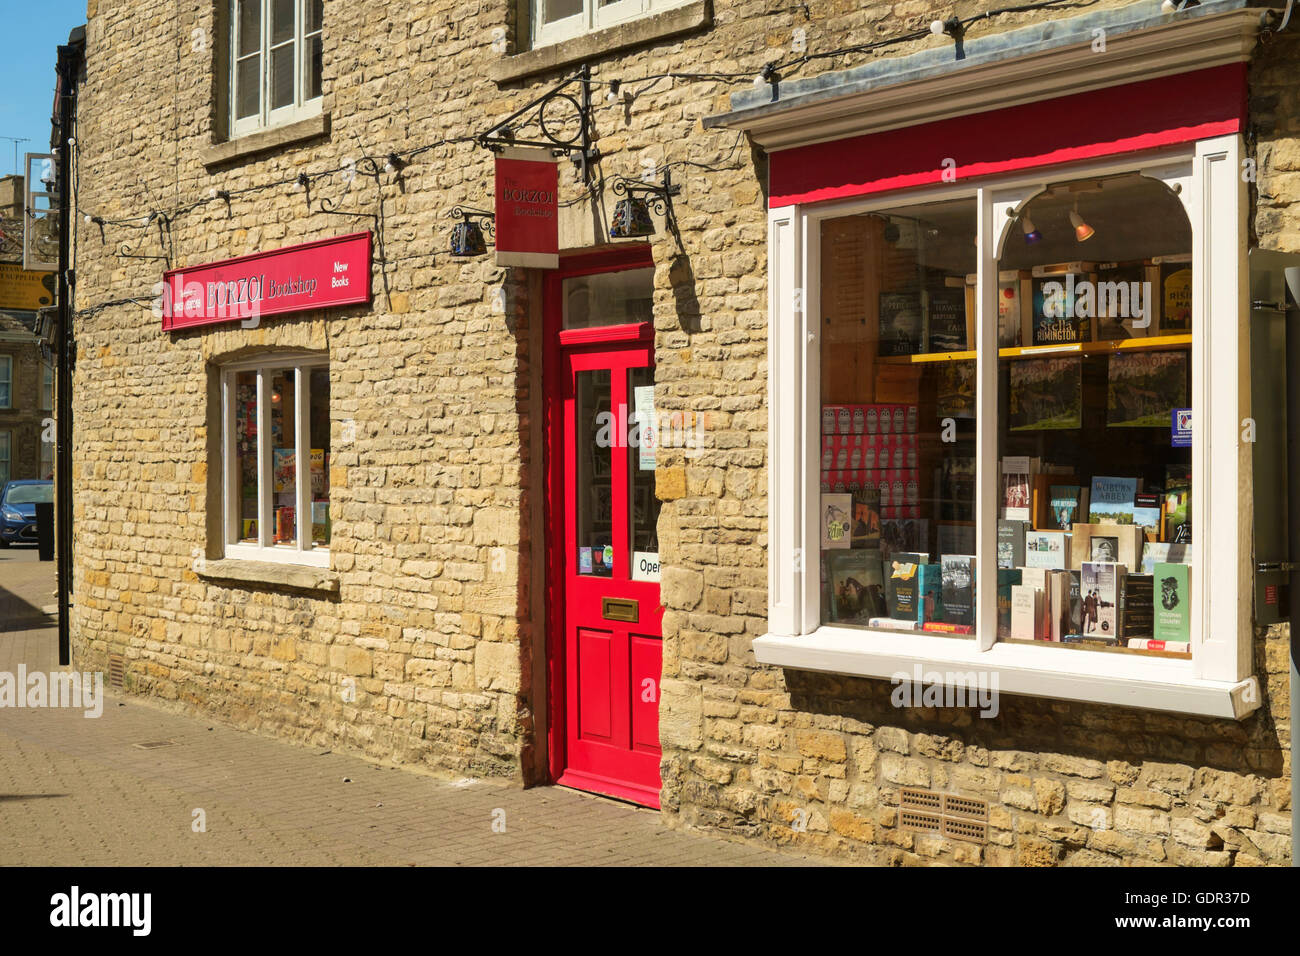 Stow-on-the-Wold a Cotswold town in Gloucestershire England UK Borzoi bookshop Stock Photo